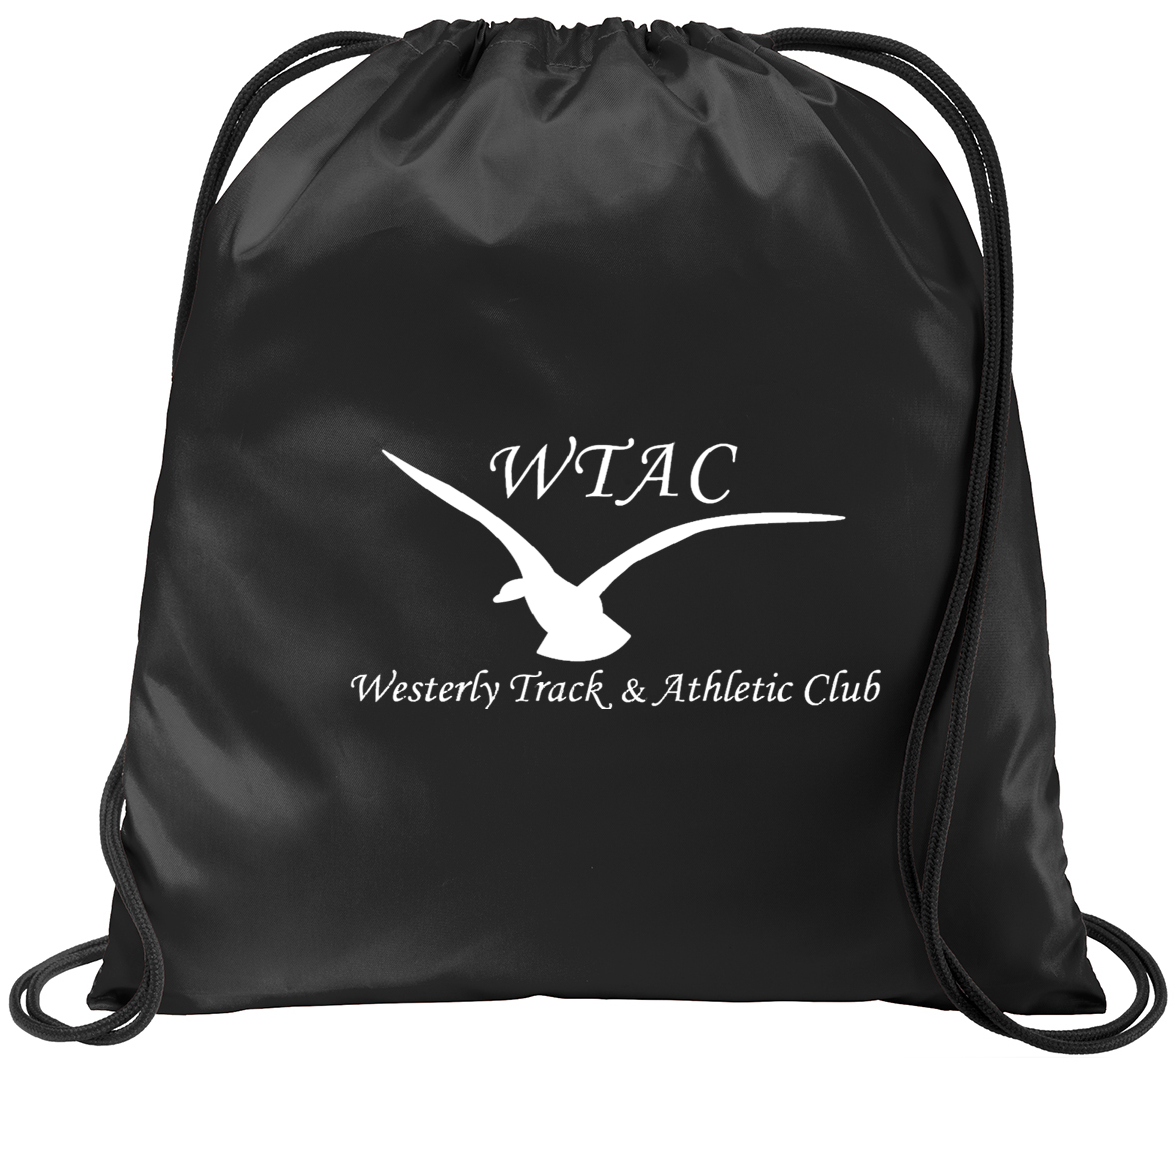 Westerly Track & Athletic Club Cinch Pack